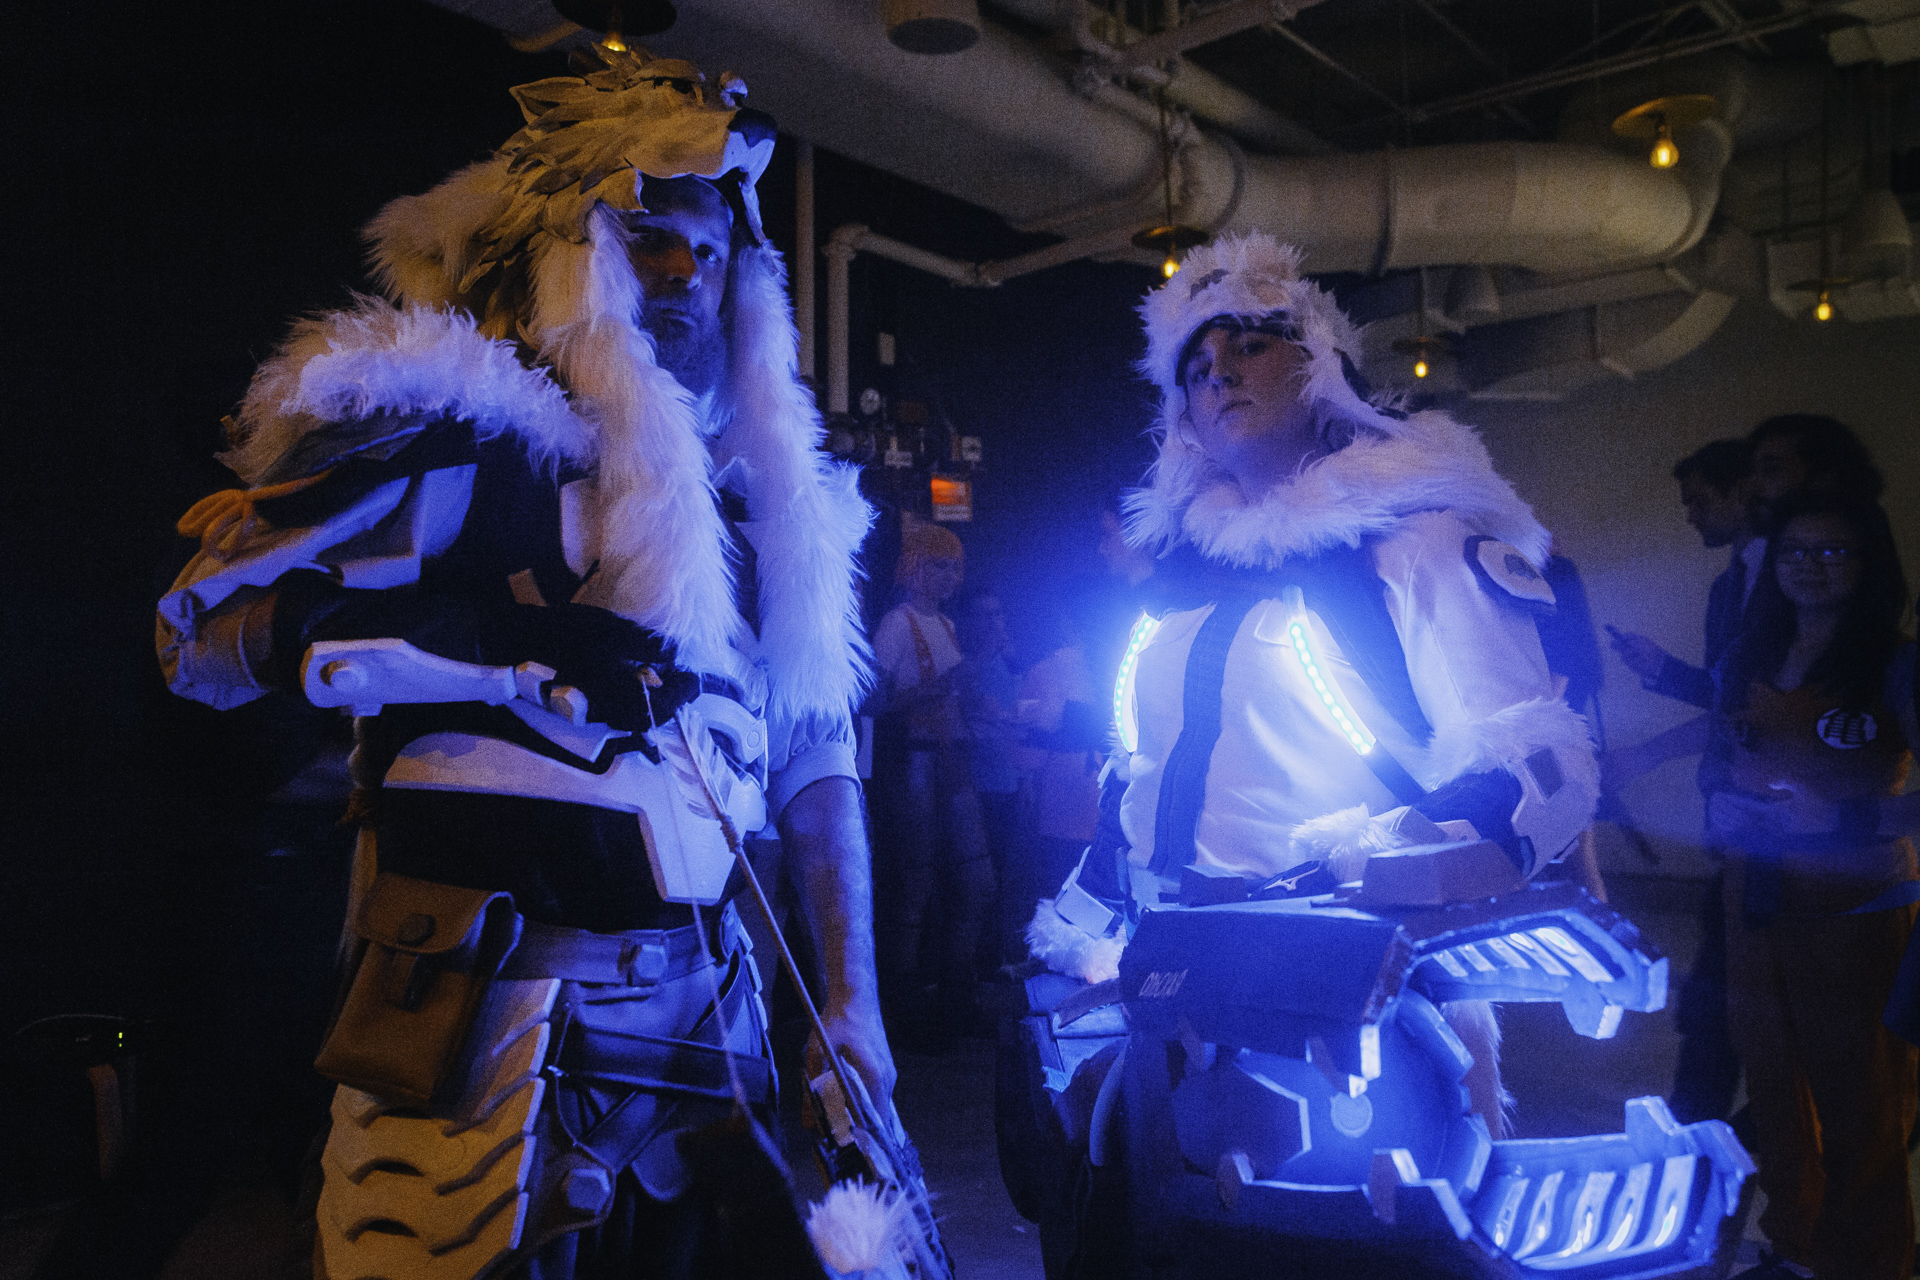 The Best Photos From Kotaku’s Cosplay Party